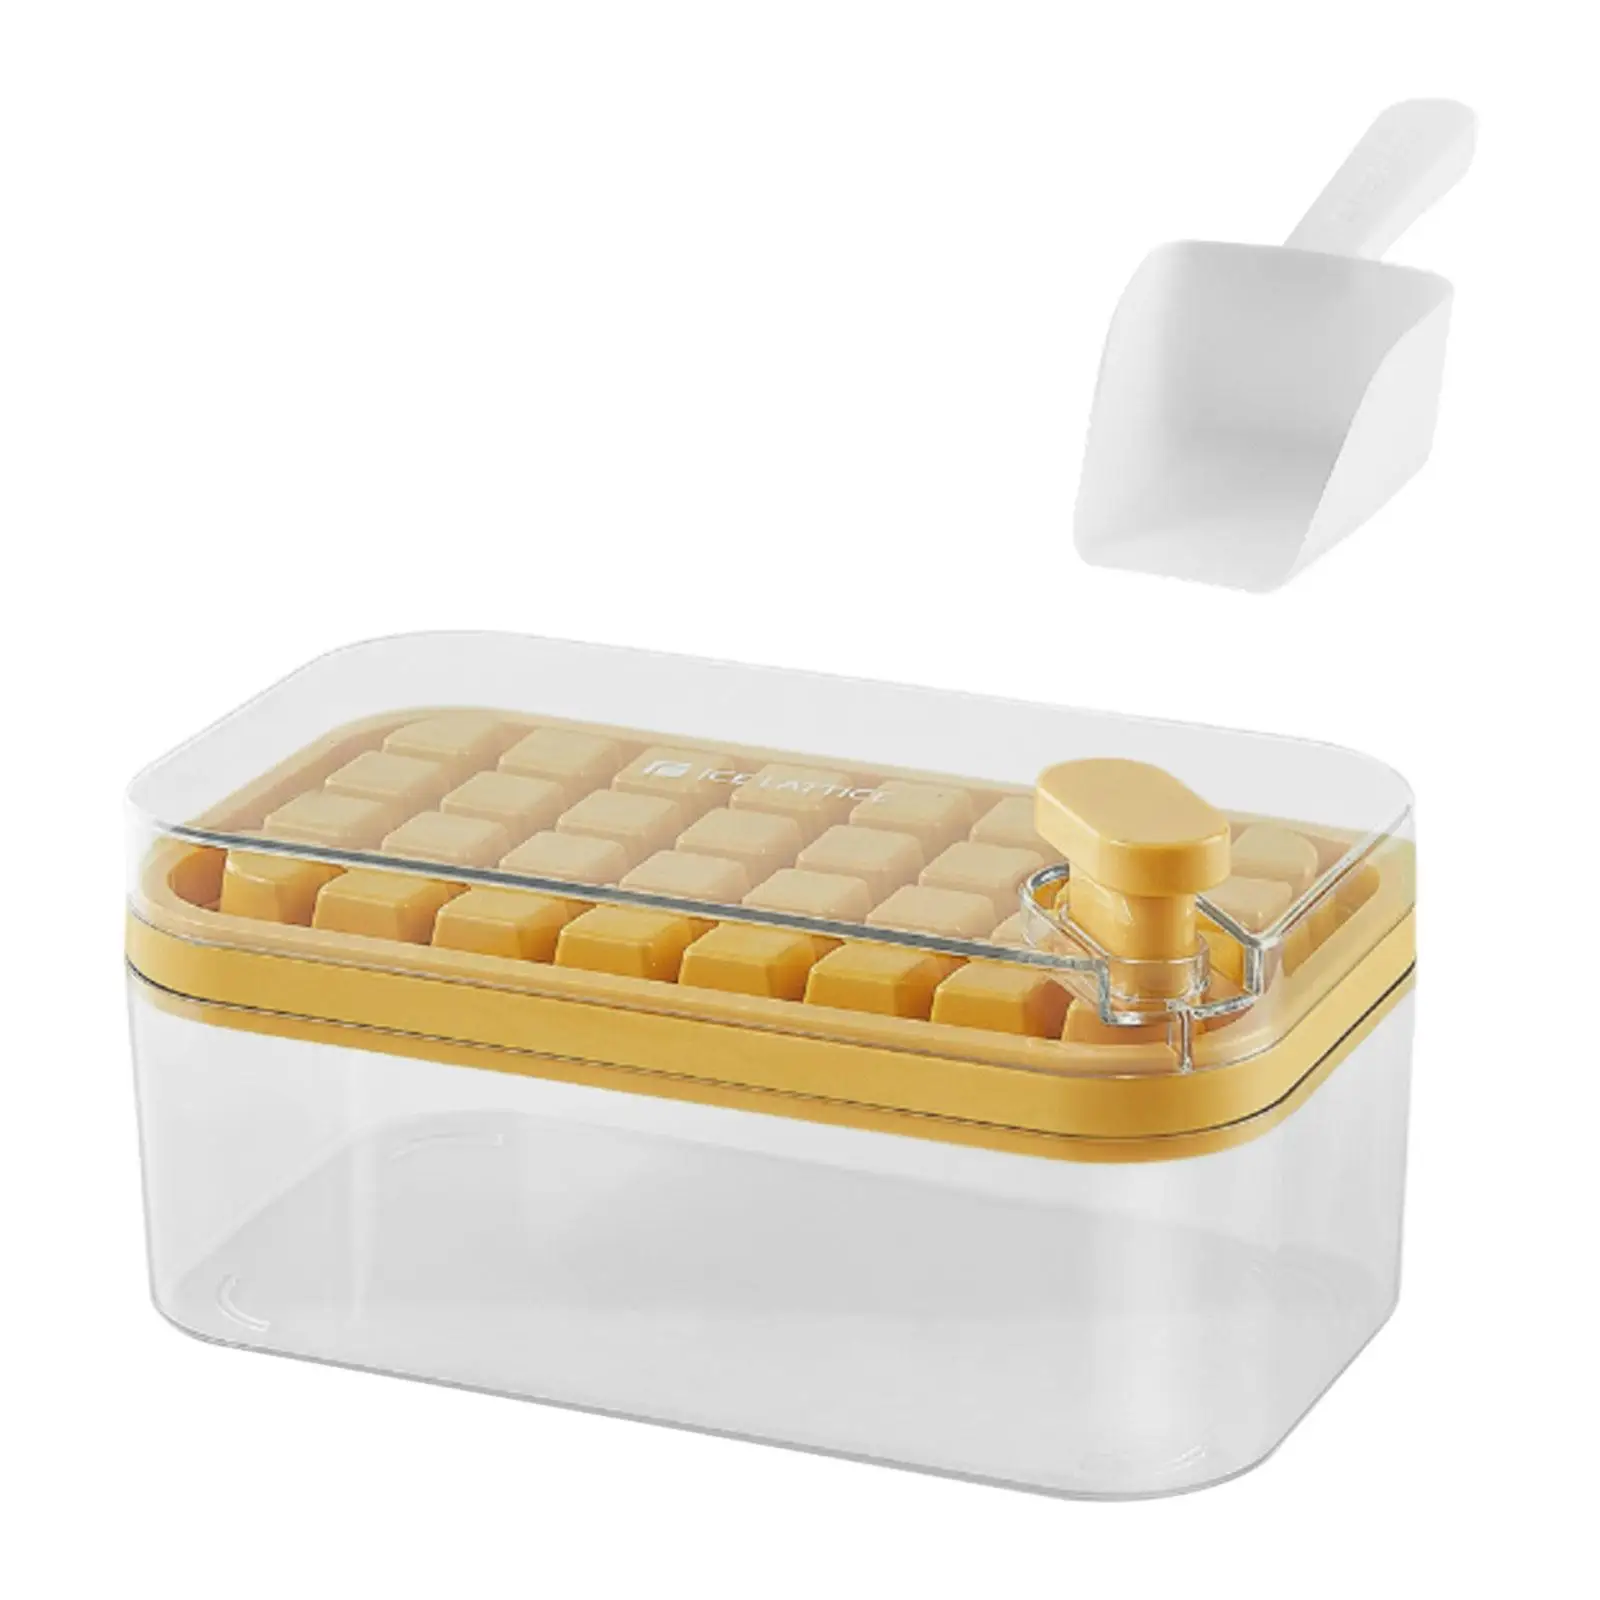 Ice Cube Tray Ice Storage Box Ice Square Shape Ice Cube Making Tray for Chilling Drinks Juice Smoothie Cocktails Coffee